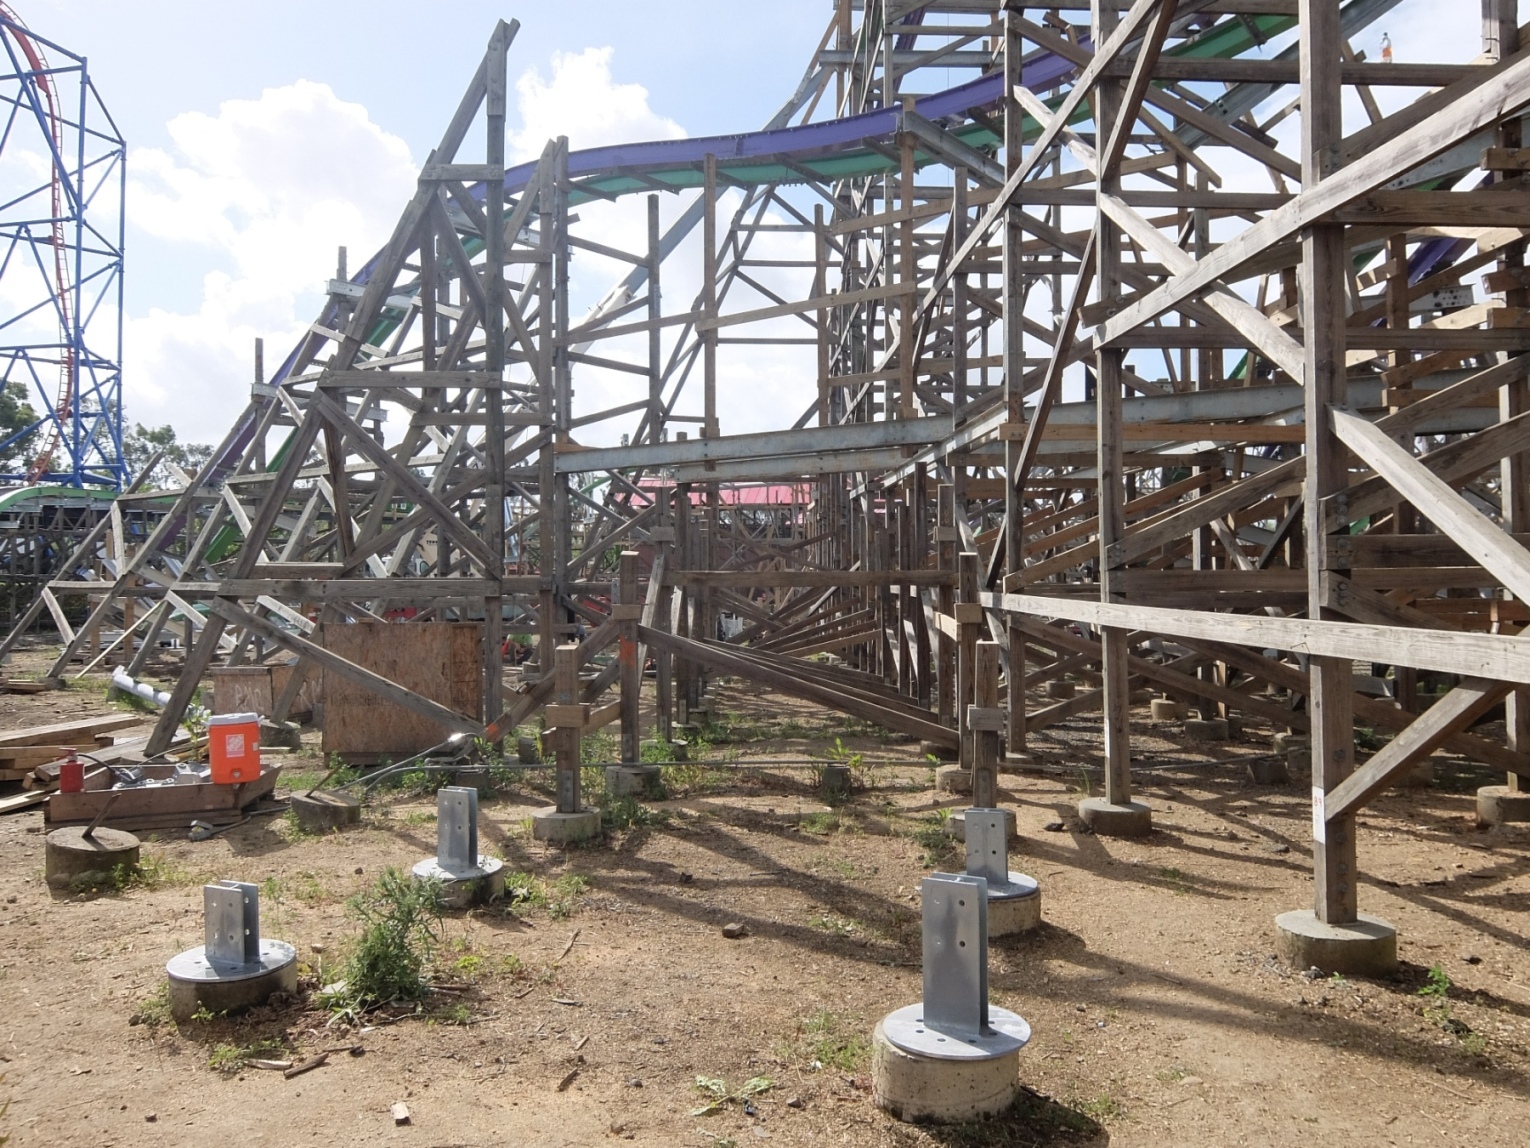 The zero-G roll under the camelback is one of the last elements left to be constructed.